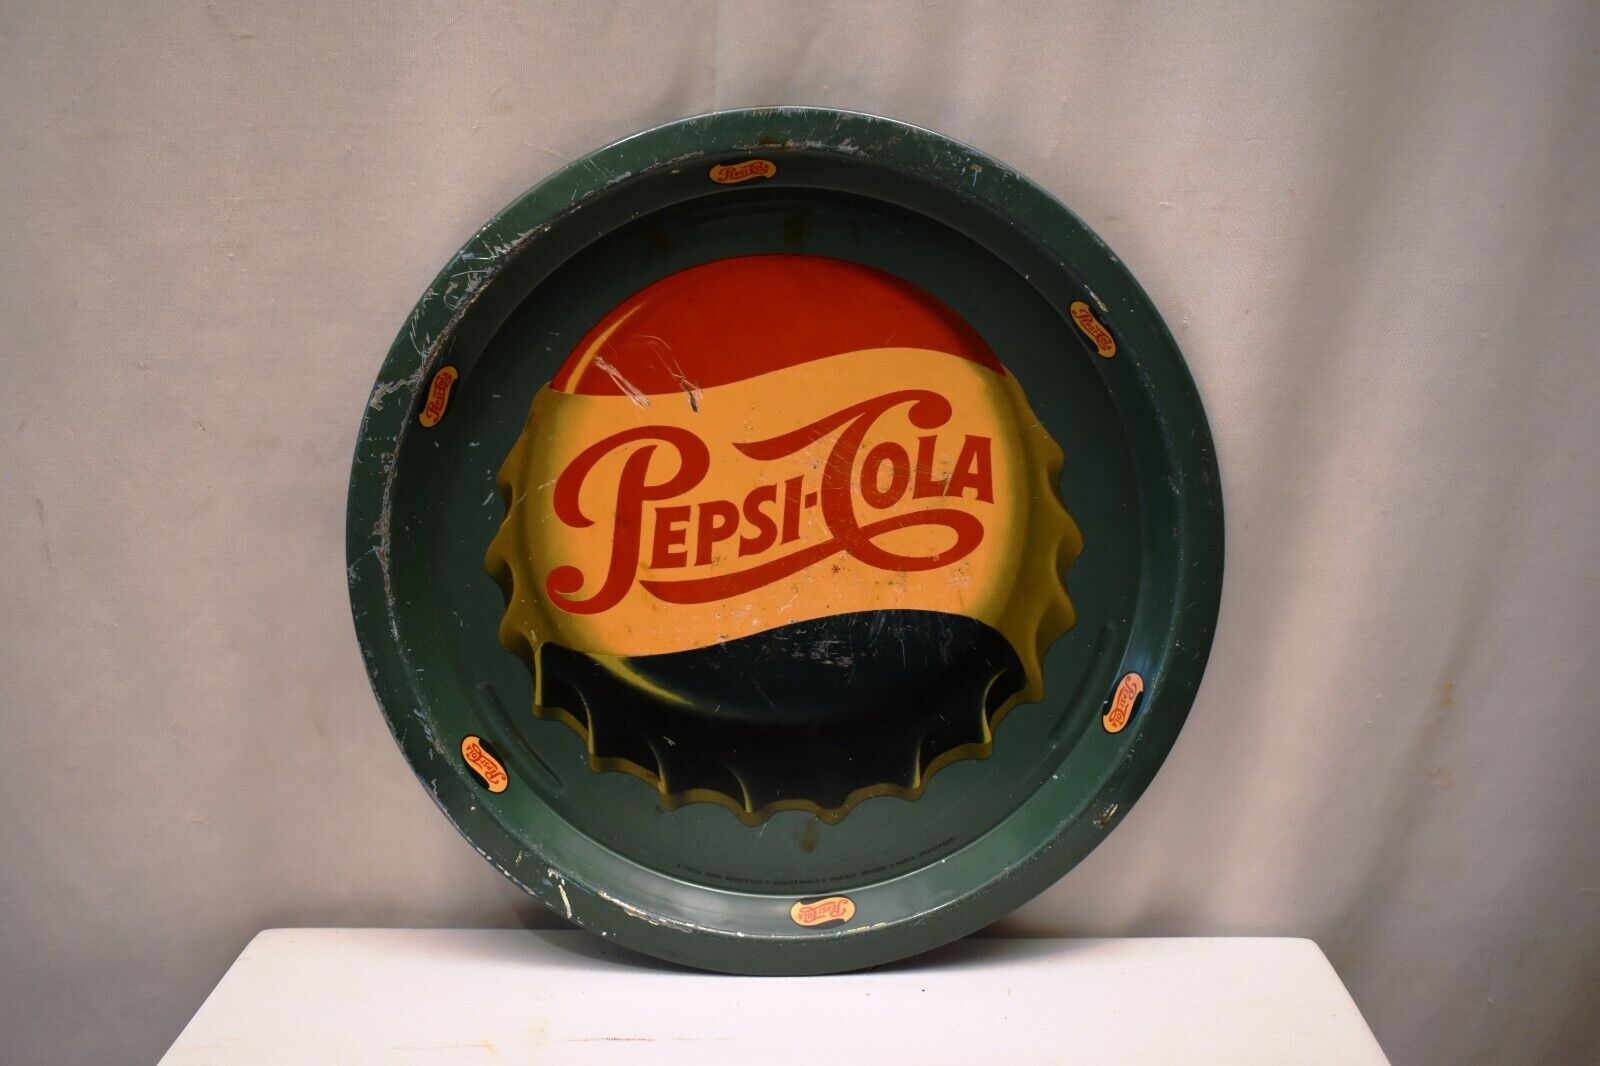 Vintage Pepsi-Cola Metal Tray Advertising Carbonated Soft Drink Collectibles Old